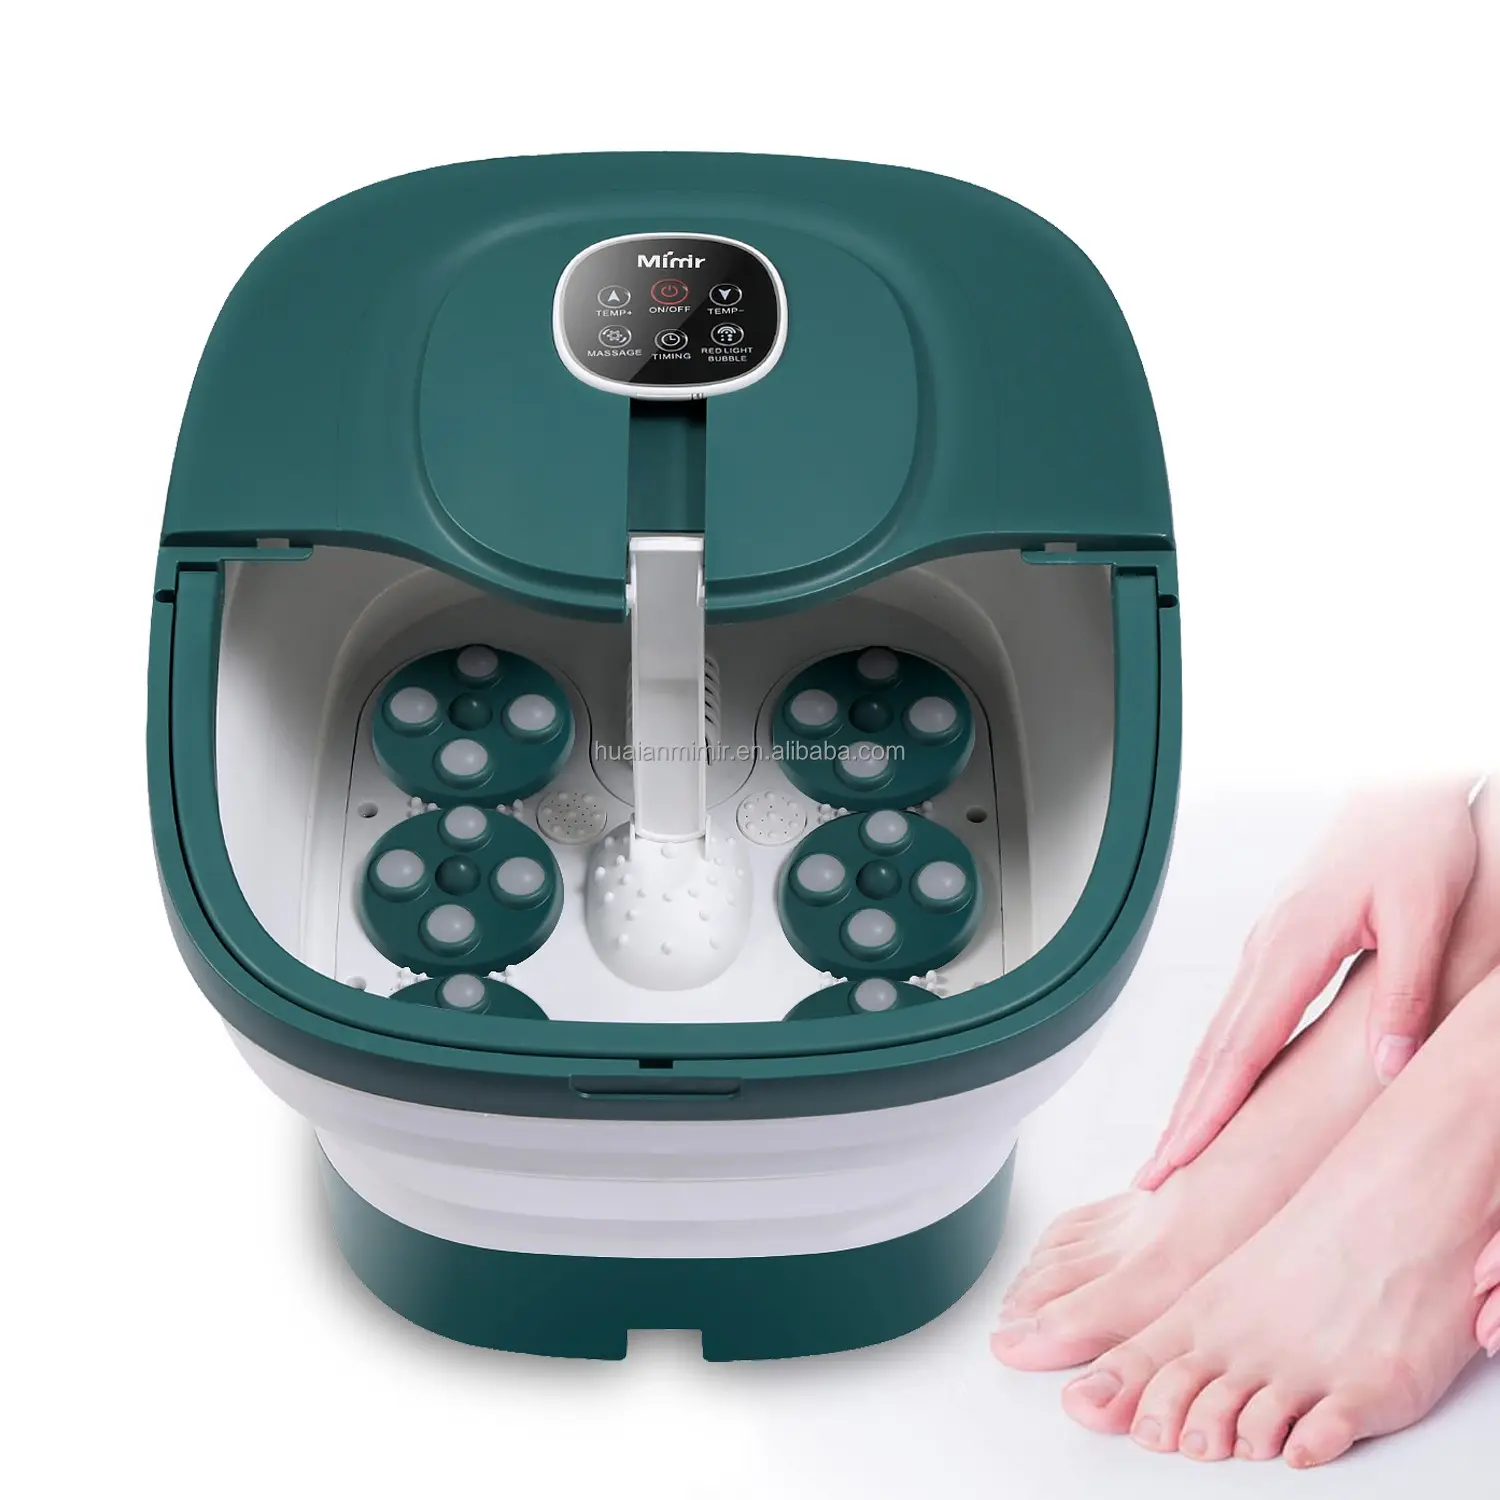 Easy Operate And Stock Wireless Remote Control Foot Spa Bath Massager Machine For Home Tired Foot Rest